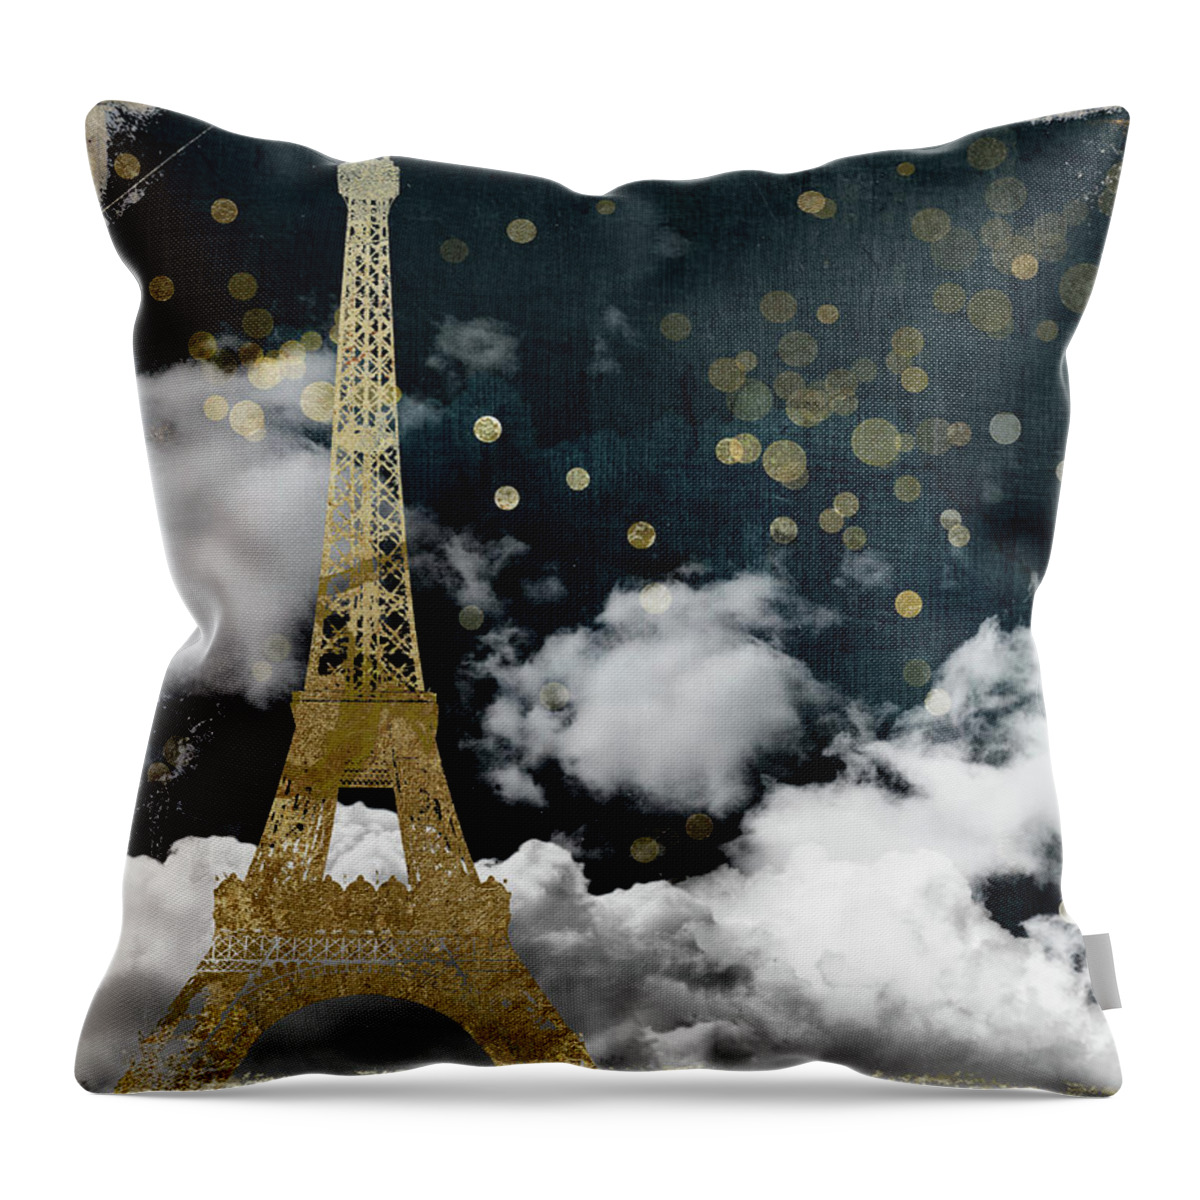 Paris Throw Pillow featuring the painting Cloud Cities Paris by Mindy Sommers